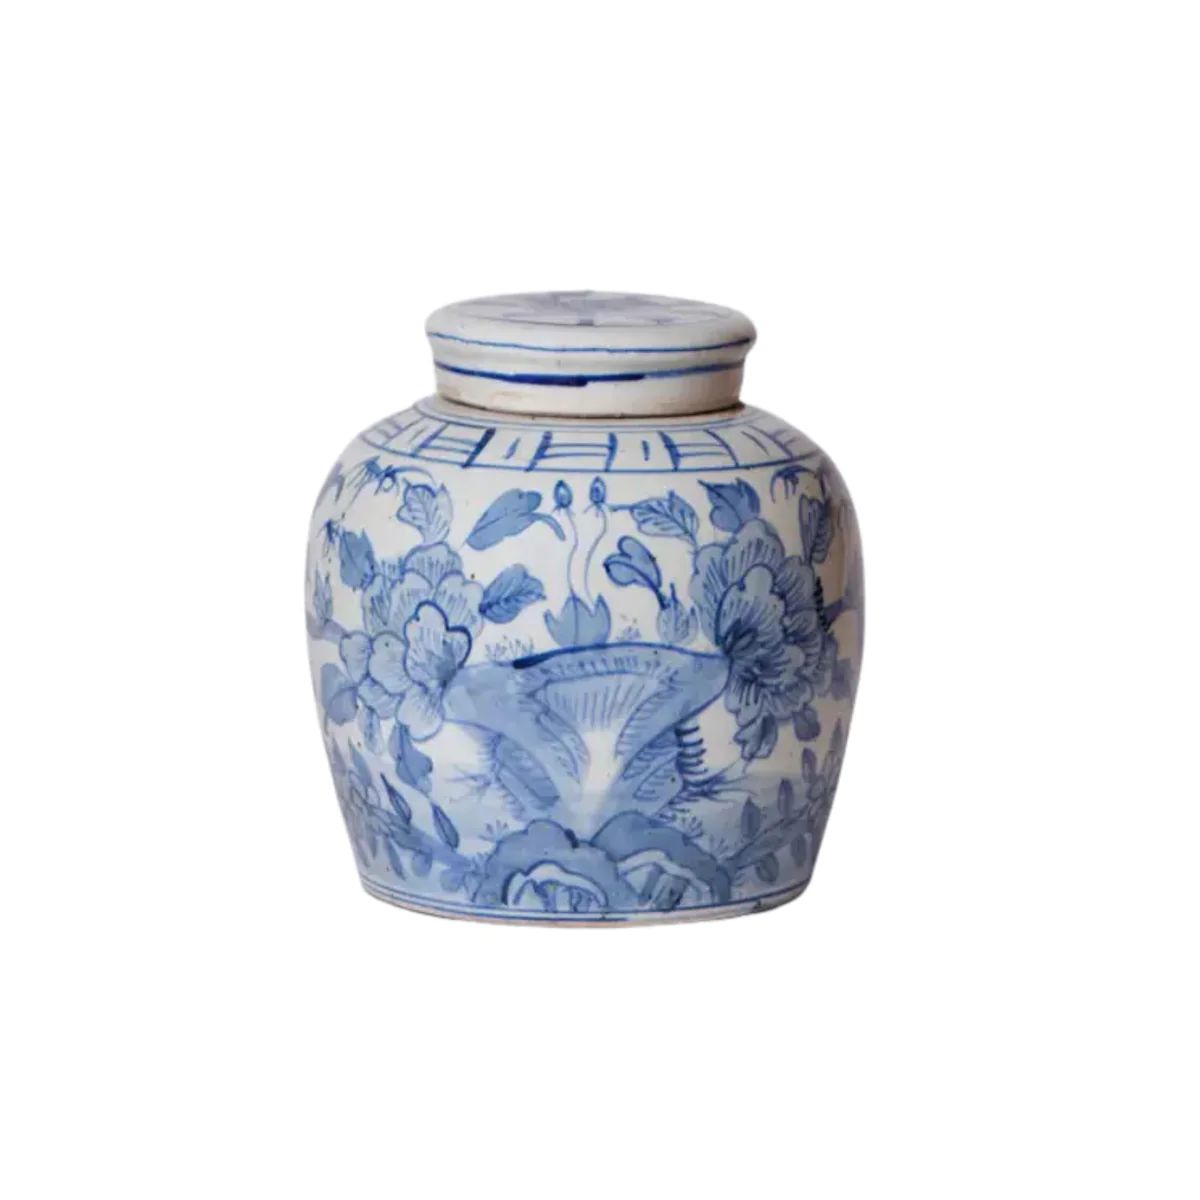 Blue and White Porcelain Rustic Floral Round Storage Jar | The Well Appointed House, LLC